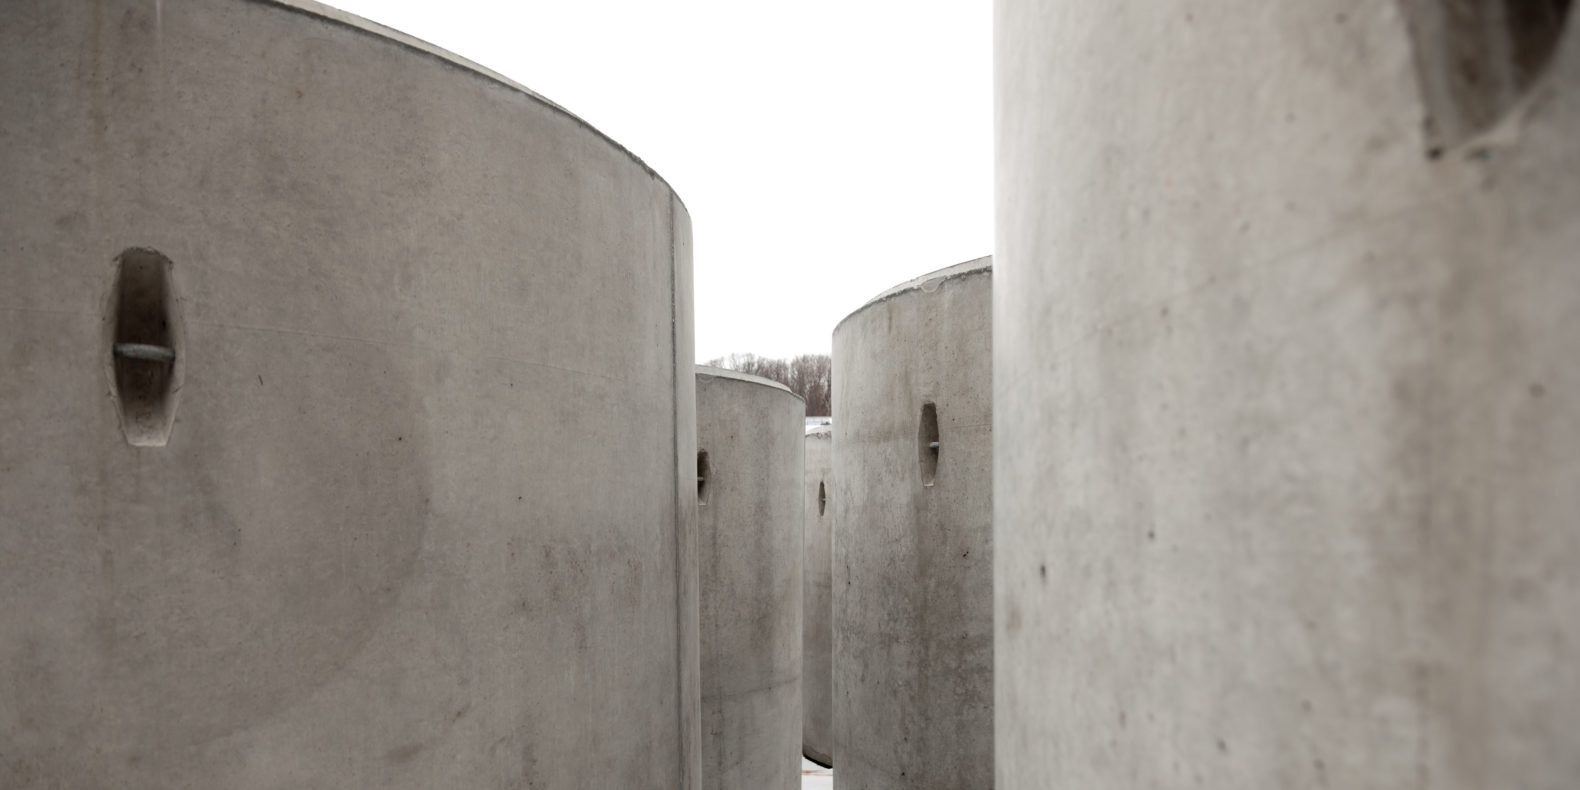 Taryn Simon The Pipes feature image, large concrete cylinders in the snow pre-install